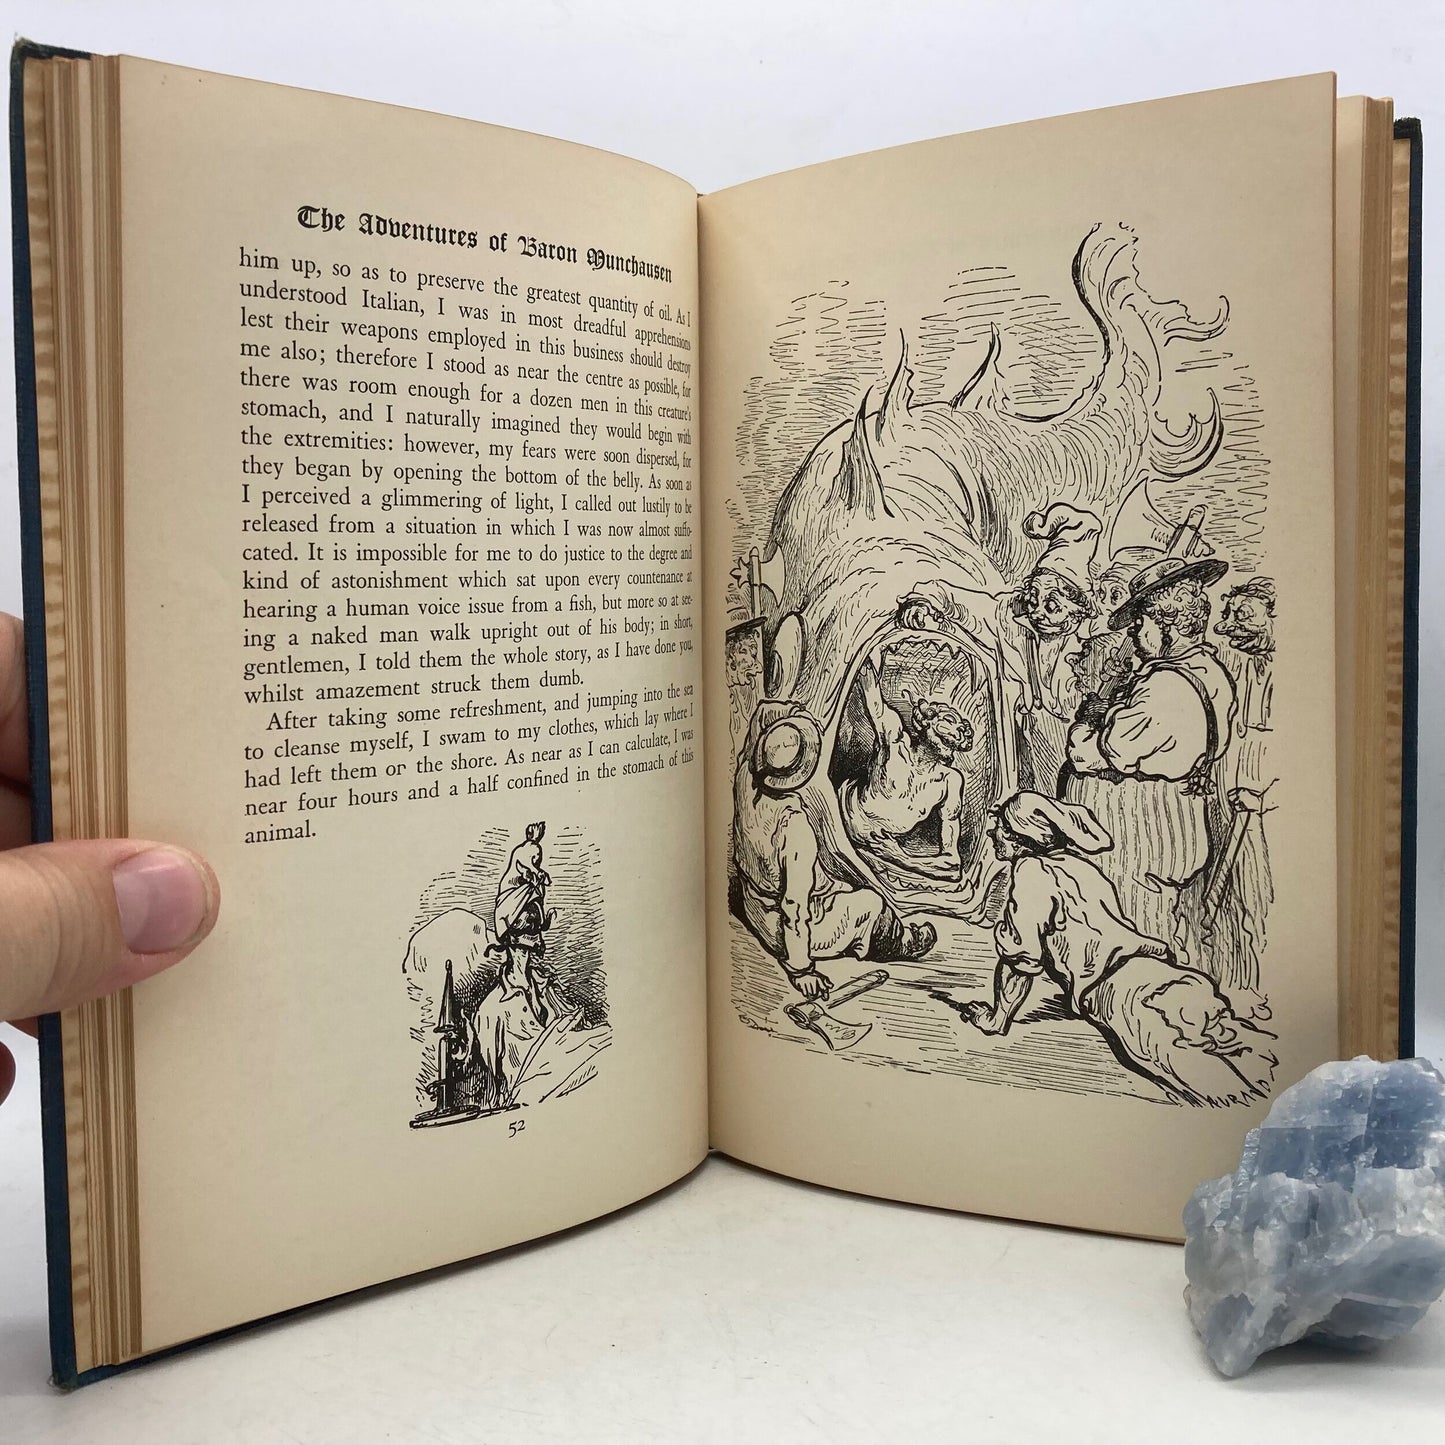 "The Adventures of Baron Munchausen" [Illustrated Editions Company, c1935] - Buzz Bookstore